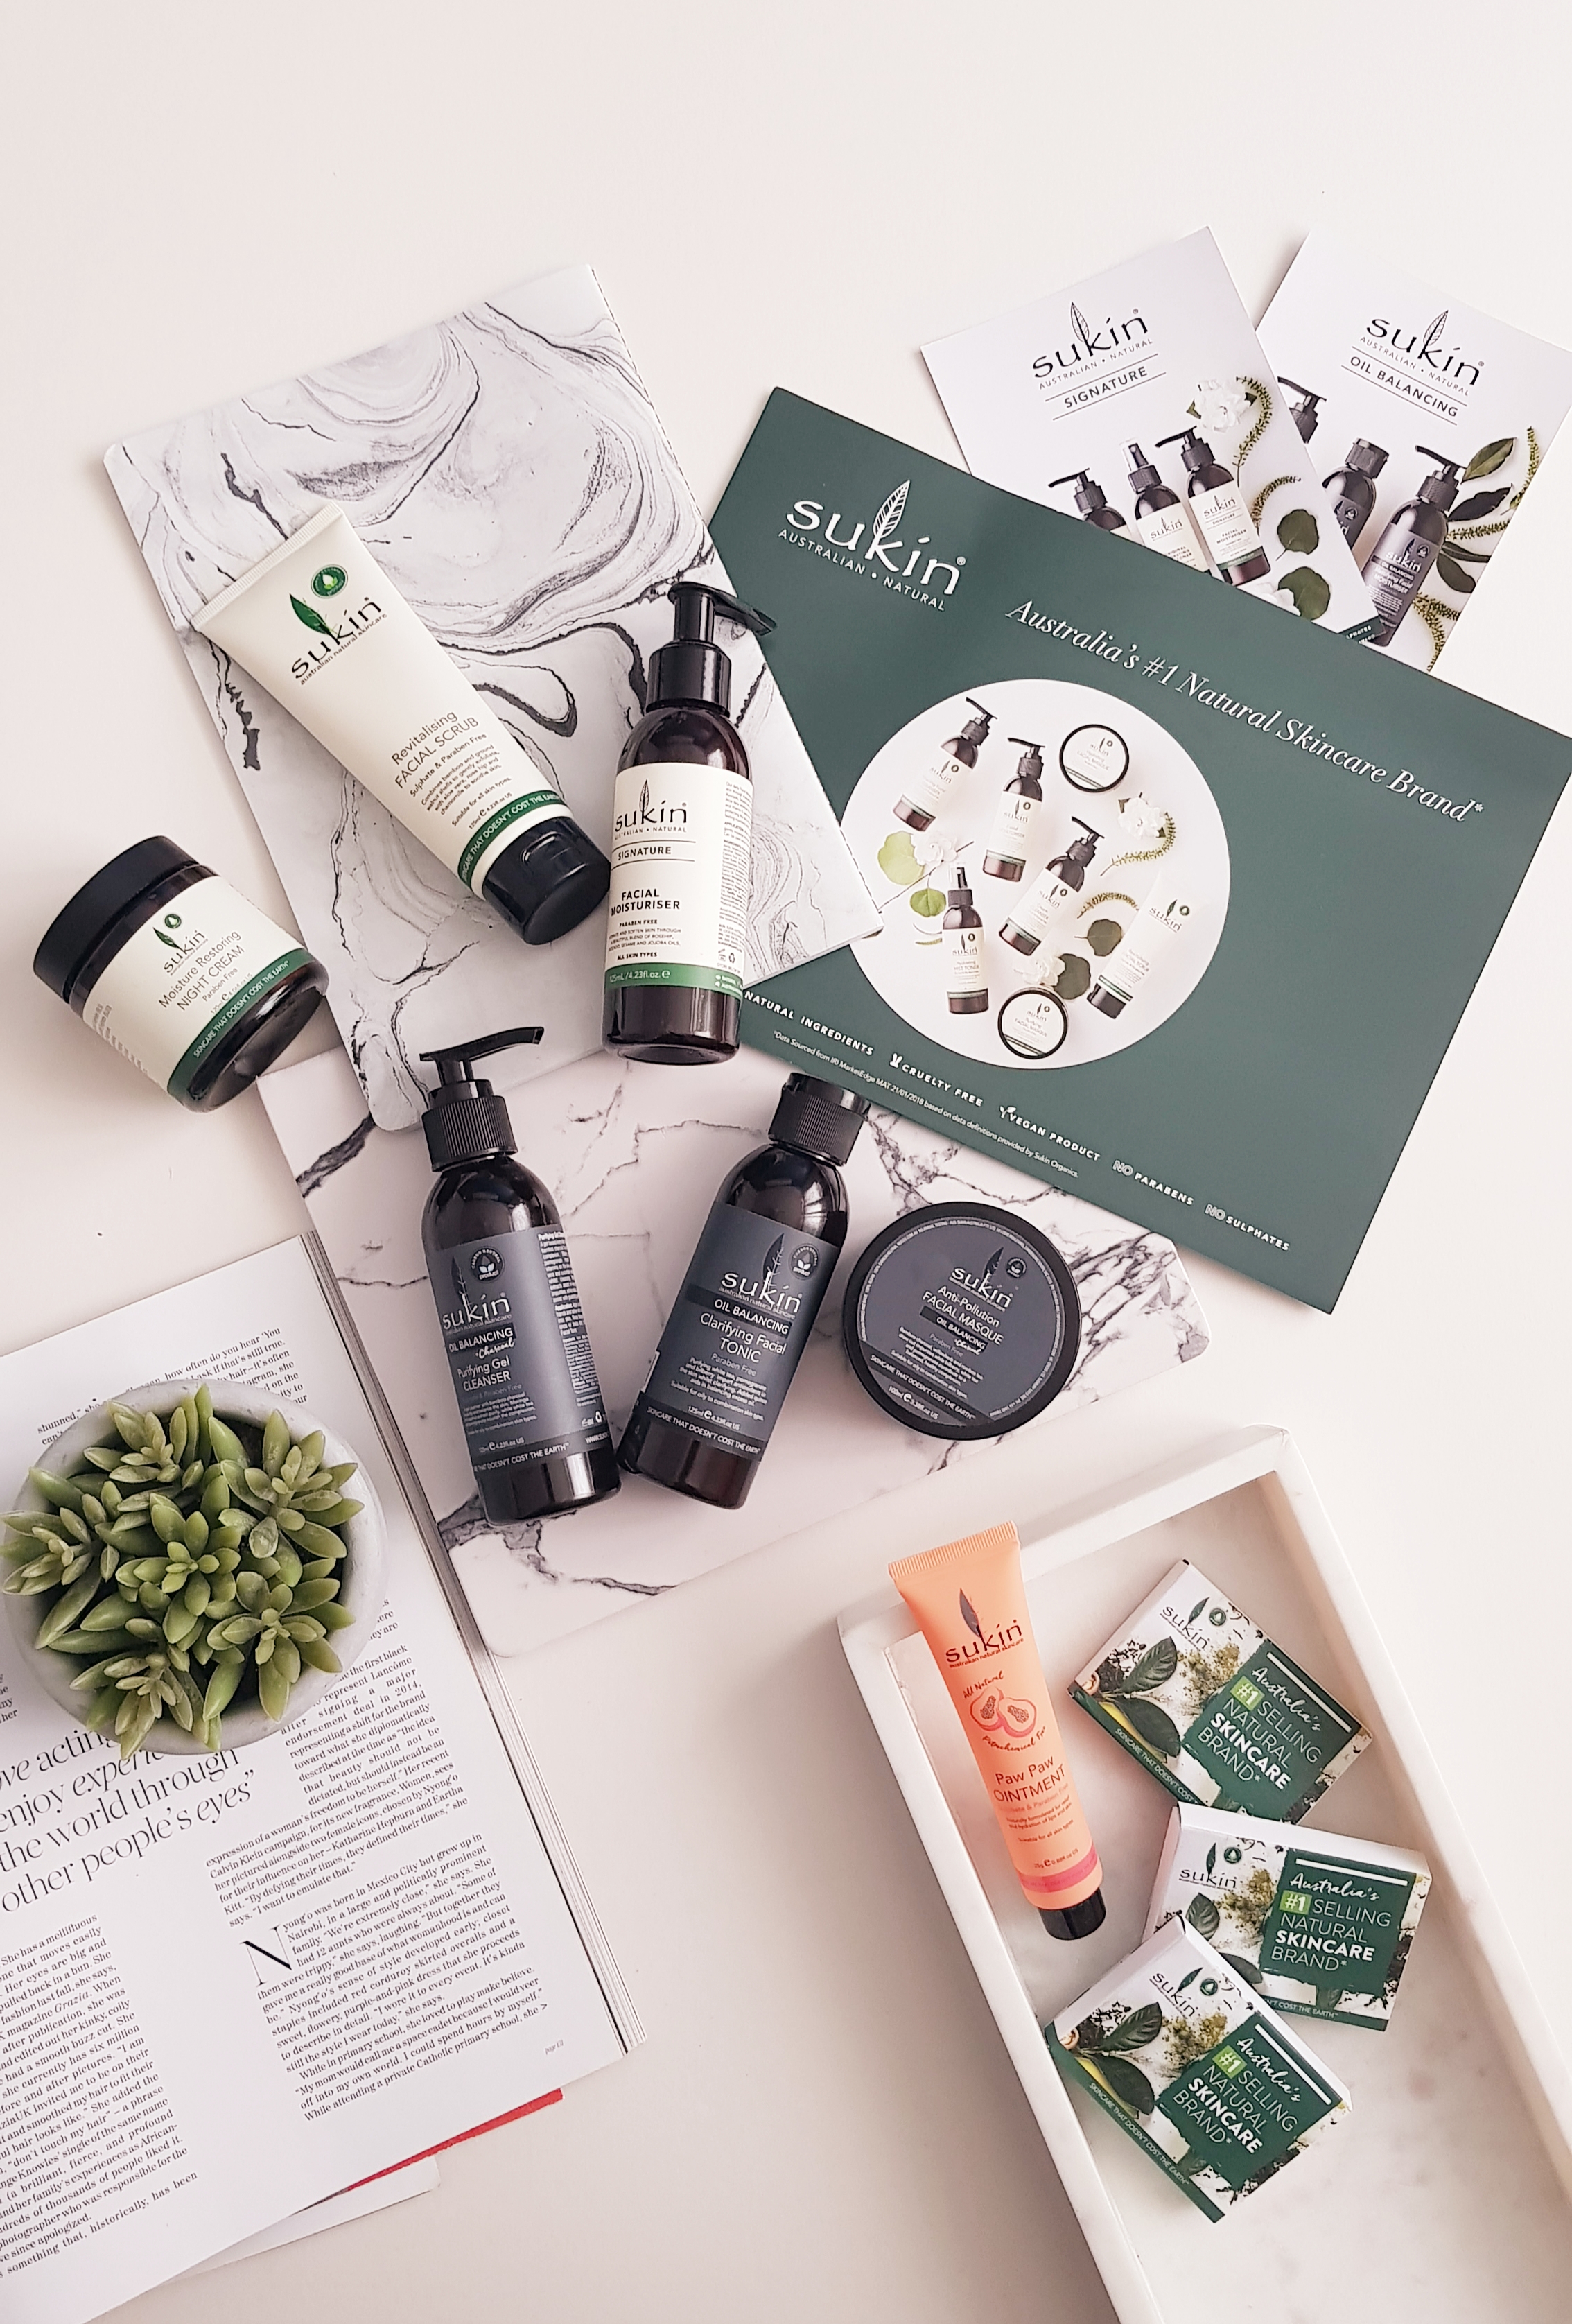 Sukin Skincare - Natural skincare brand for all skin types ( Oily, combination, dry, sensitive or congested skin) - Ms Tantrum Blog